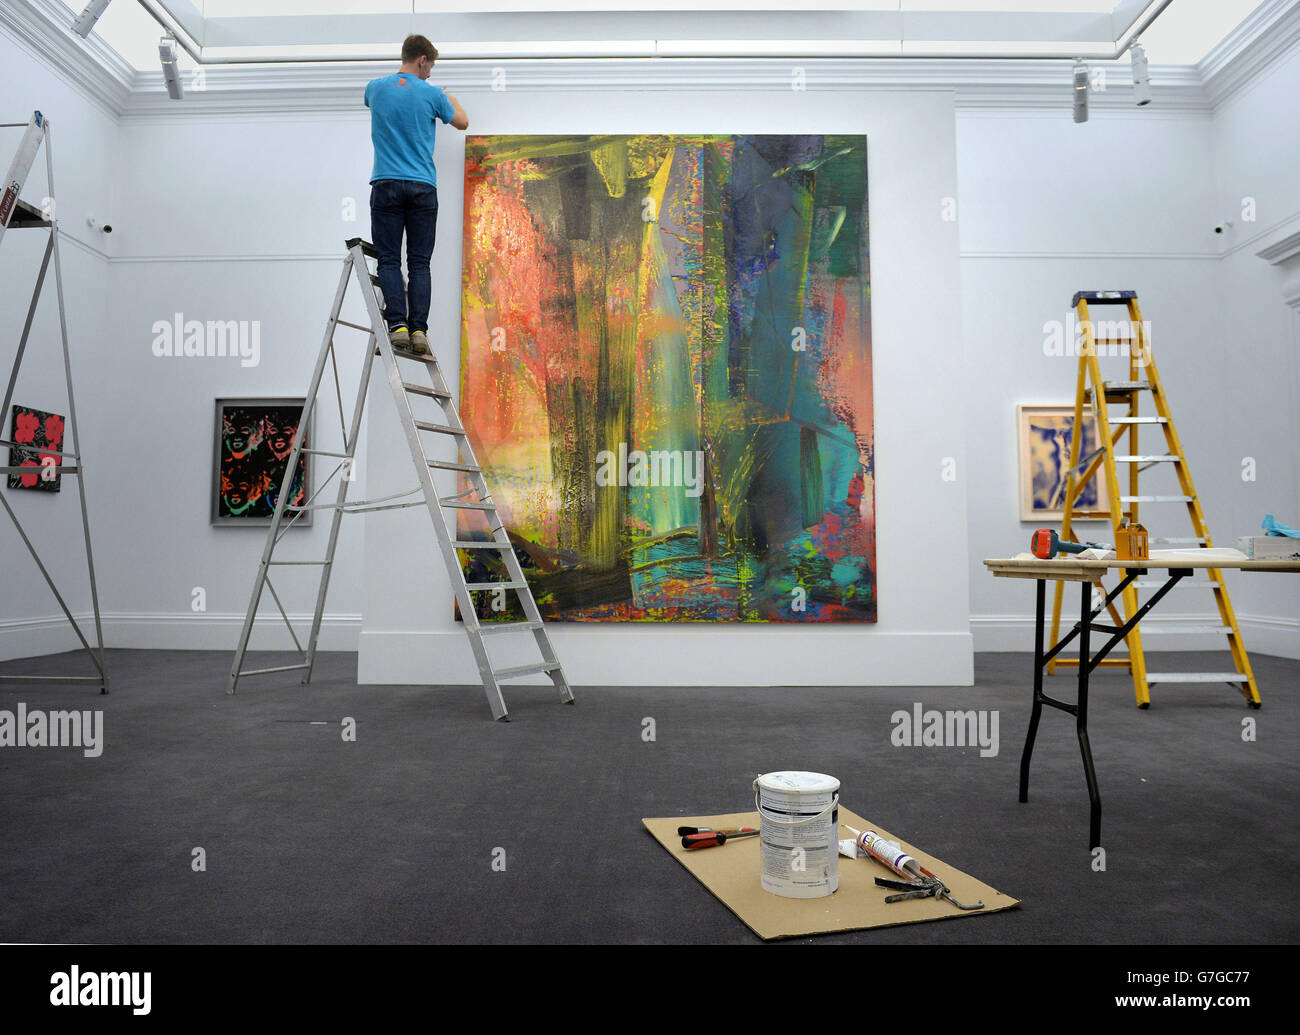 A technician adjust the lighting above Gerhard Richter's Abstraktes Bild (estimated at 14-20 million) ahead of the preview facility for the forthcoming contemporary art sales at Sotheby's auction house, London. Stock Photo